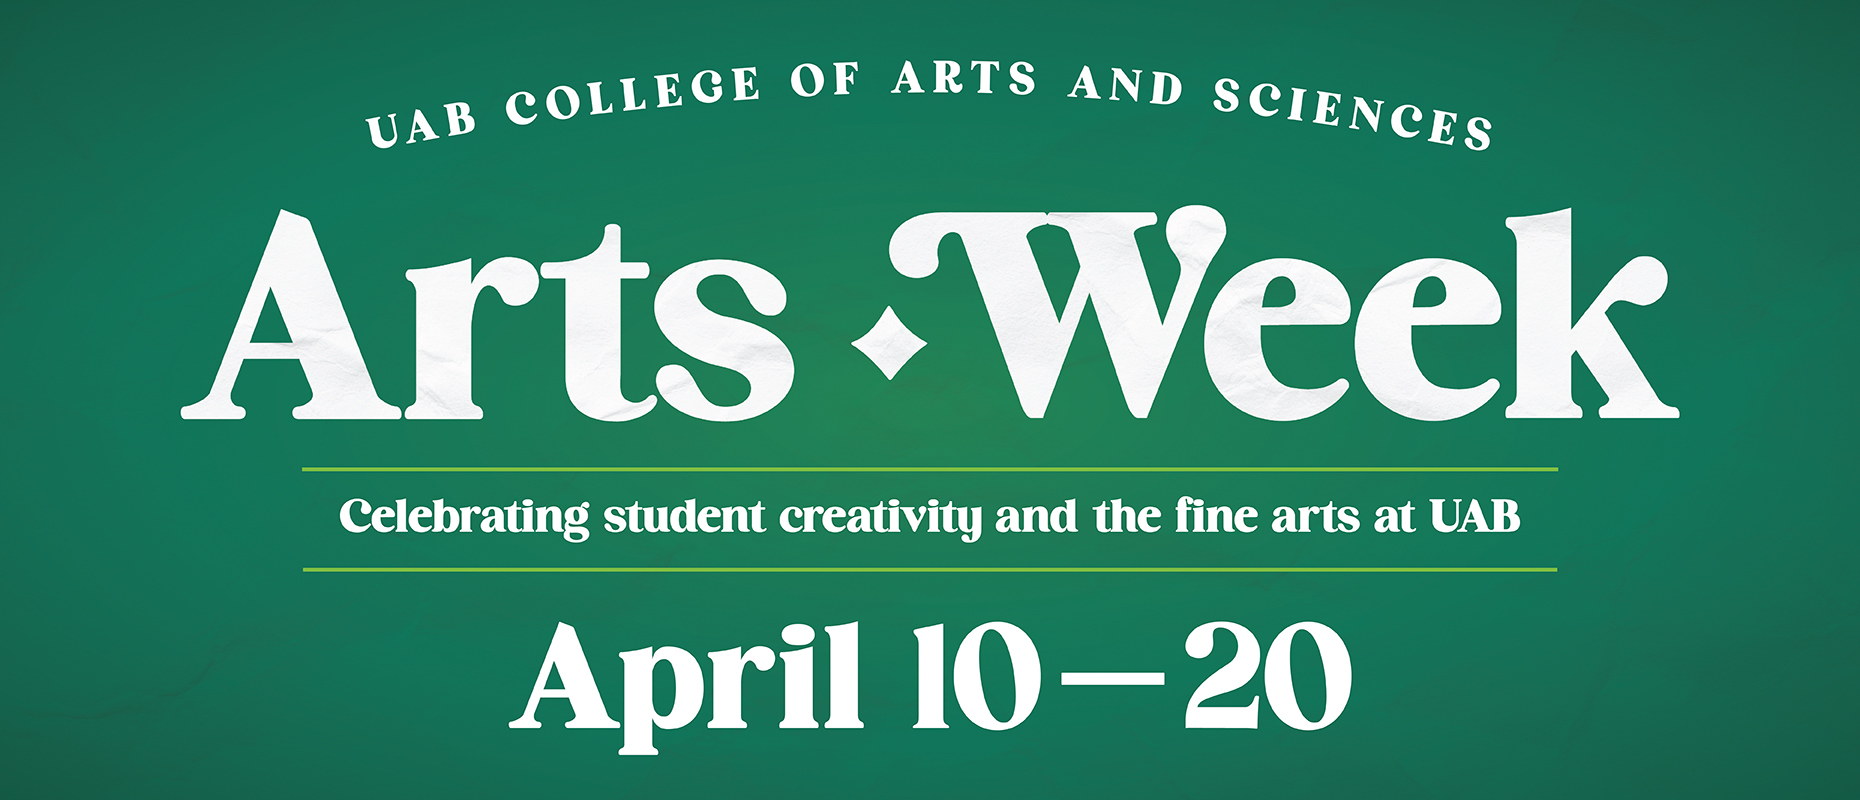 UAB College of Arts and Sciences Arts Week: Celebrating student creativity and the fine arts at UAB. April 10-20.